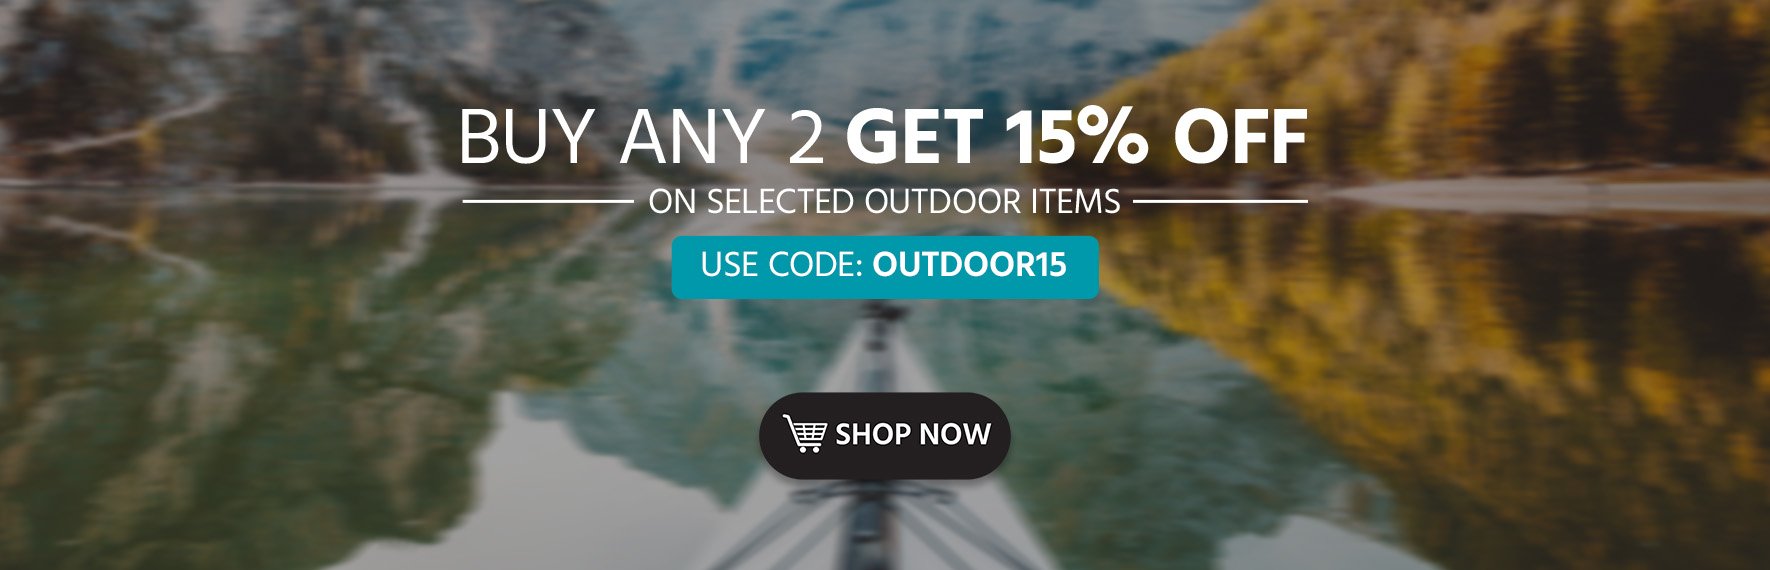 Buy any 2 and Get 15% OFF  on selected outdoor items Use Code: OUTDOOR15 Shop Now